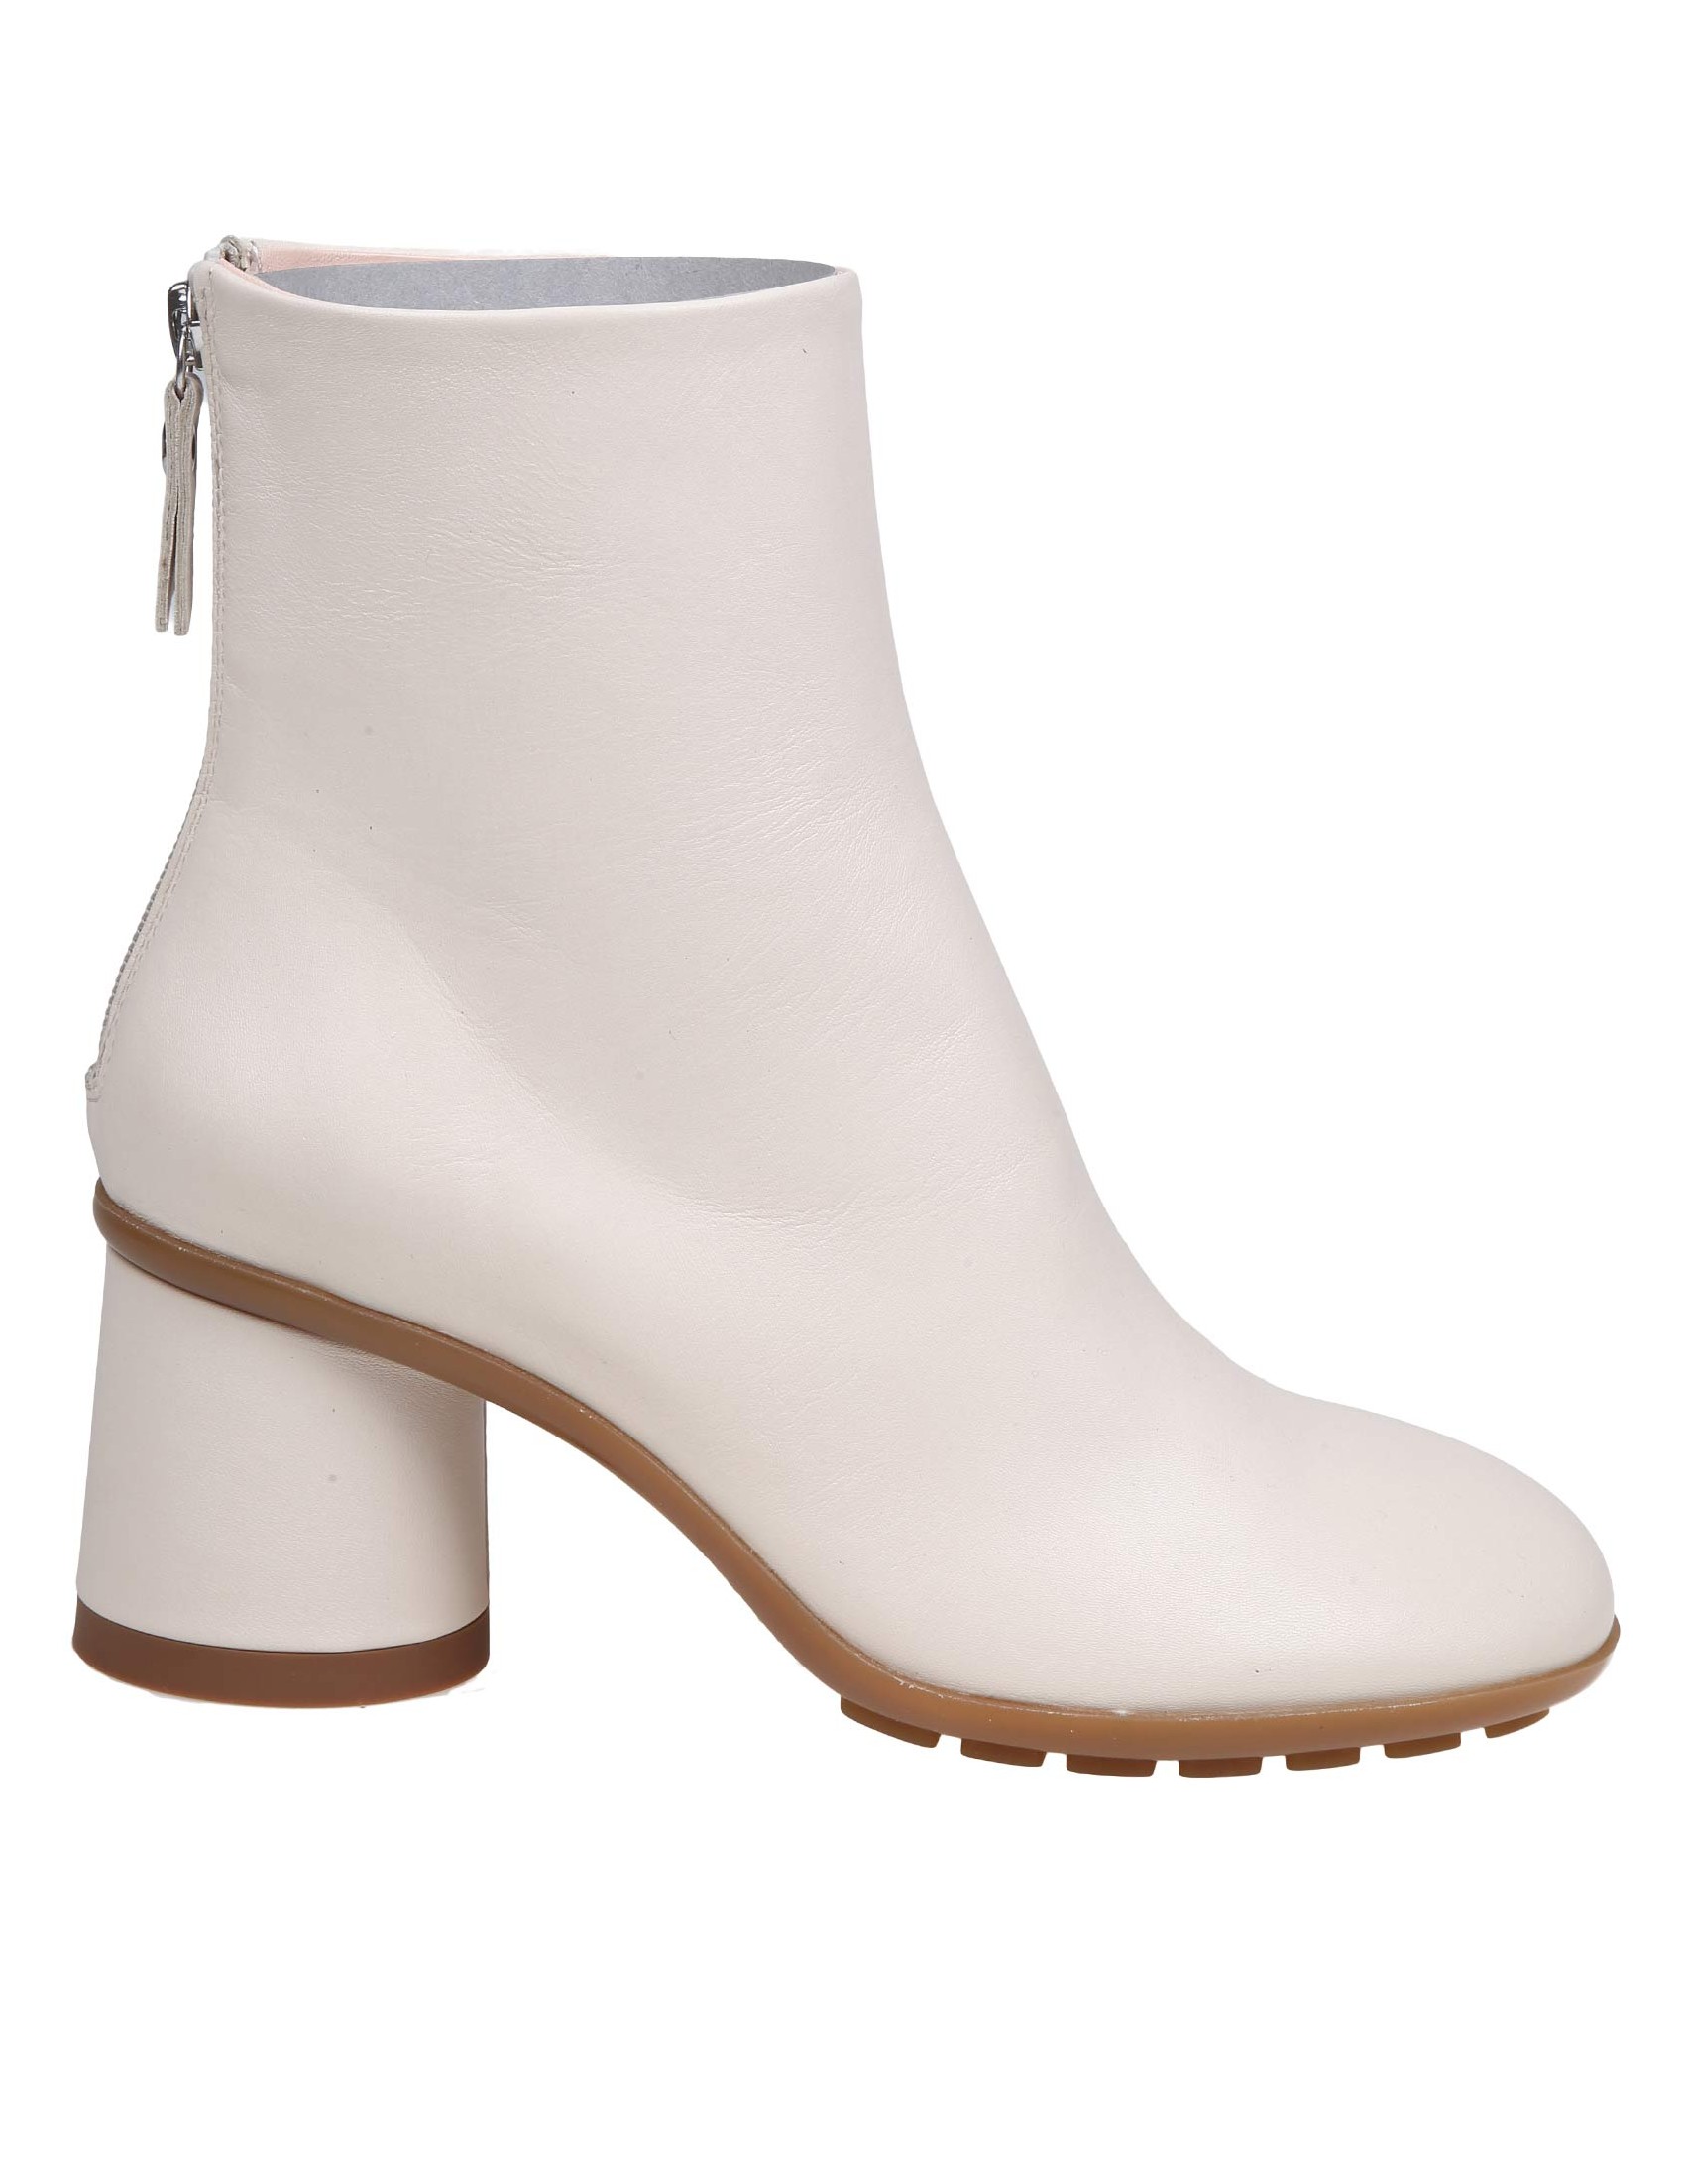 AGL CURVY ANKLE BOOTS IN CHALK COLOR LEATHER